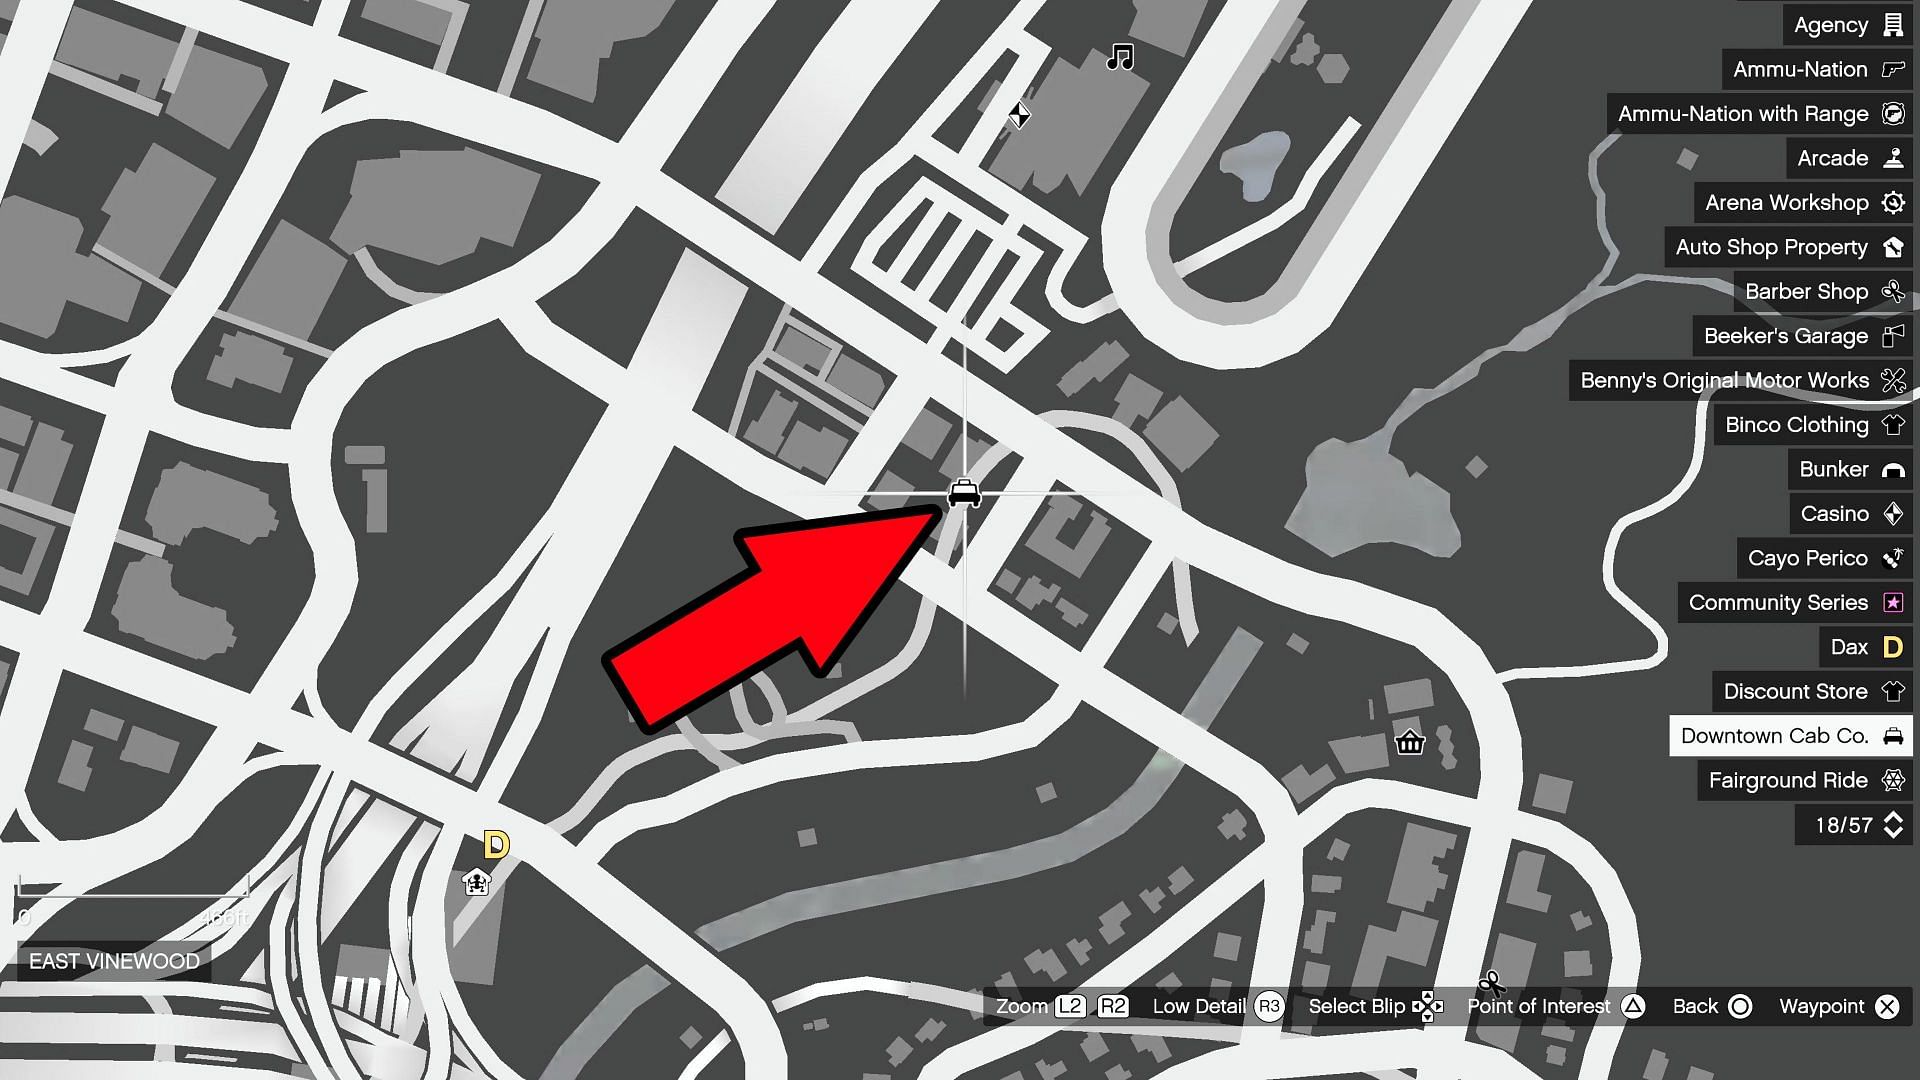 This is where Downtown Cab Co. is located (Image via Rockstar Games)